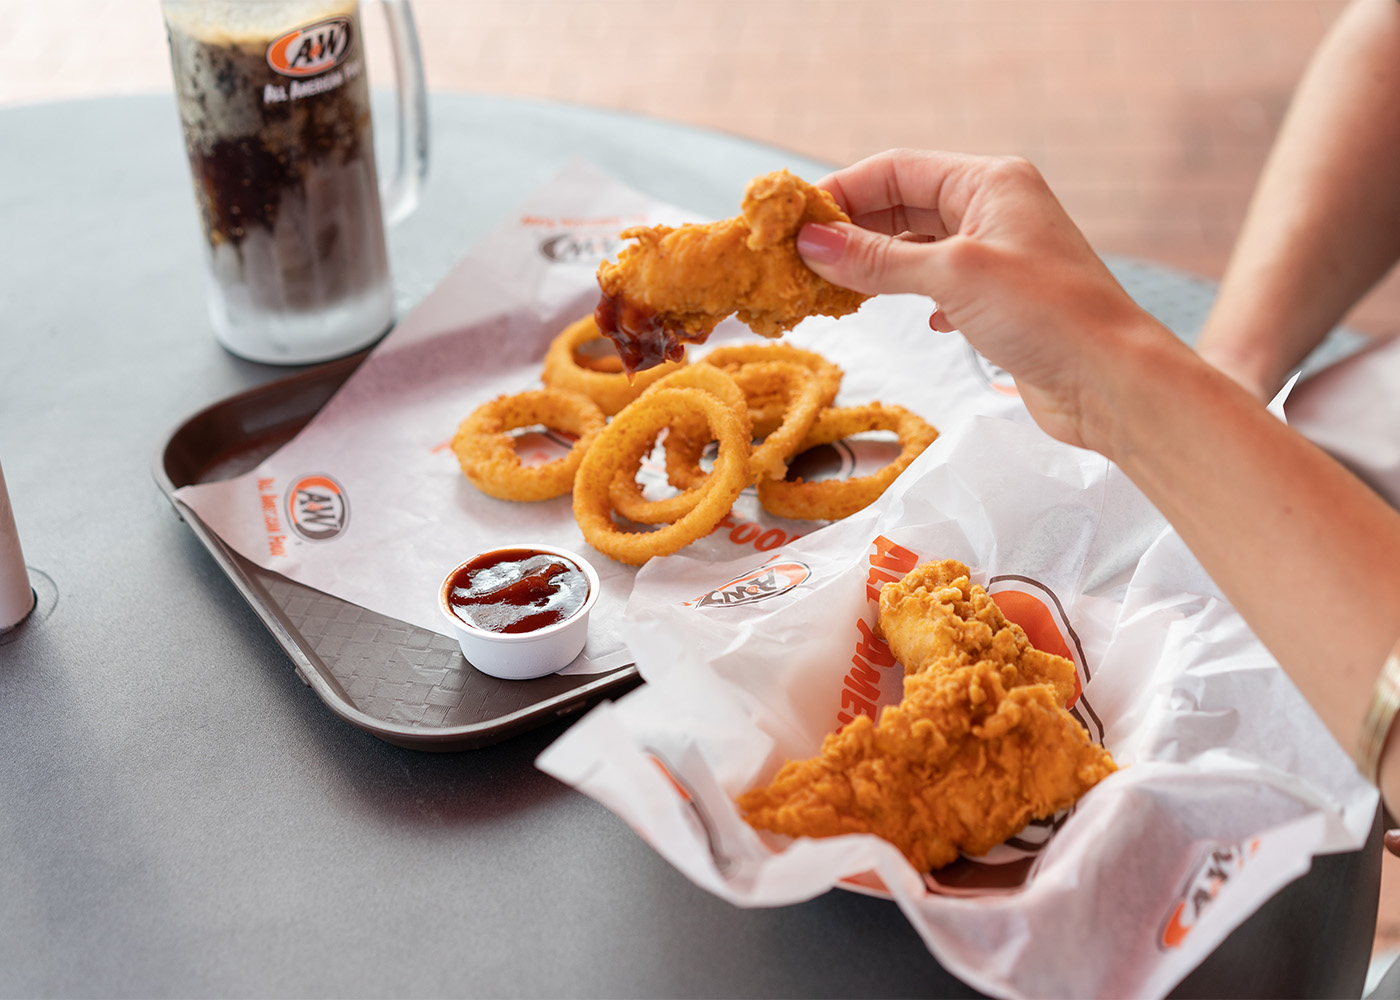 A person is sitting at a table holding a Hand-Breaded Chicken Tender. A basket of Tenders and a mug of A&W Root Beer are also on the table.